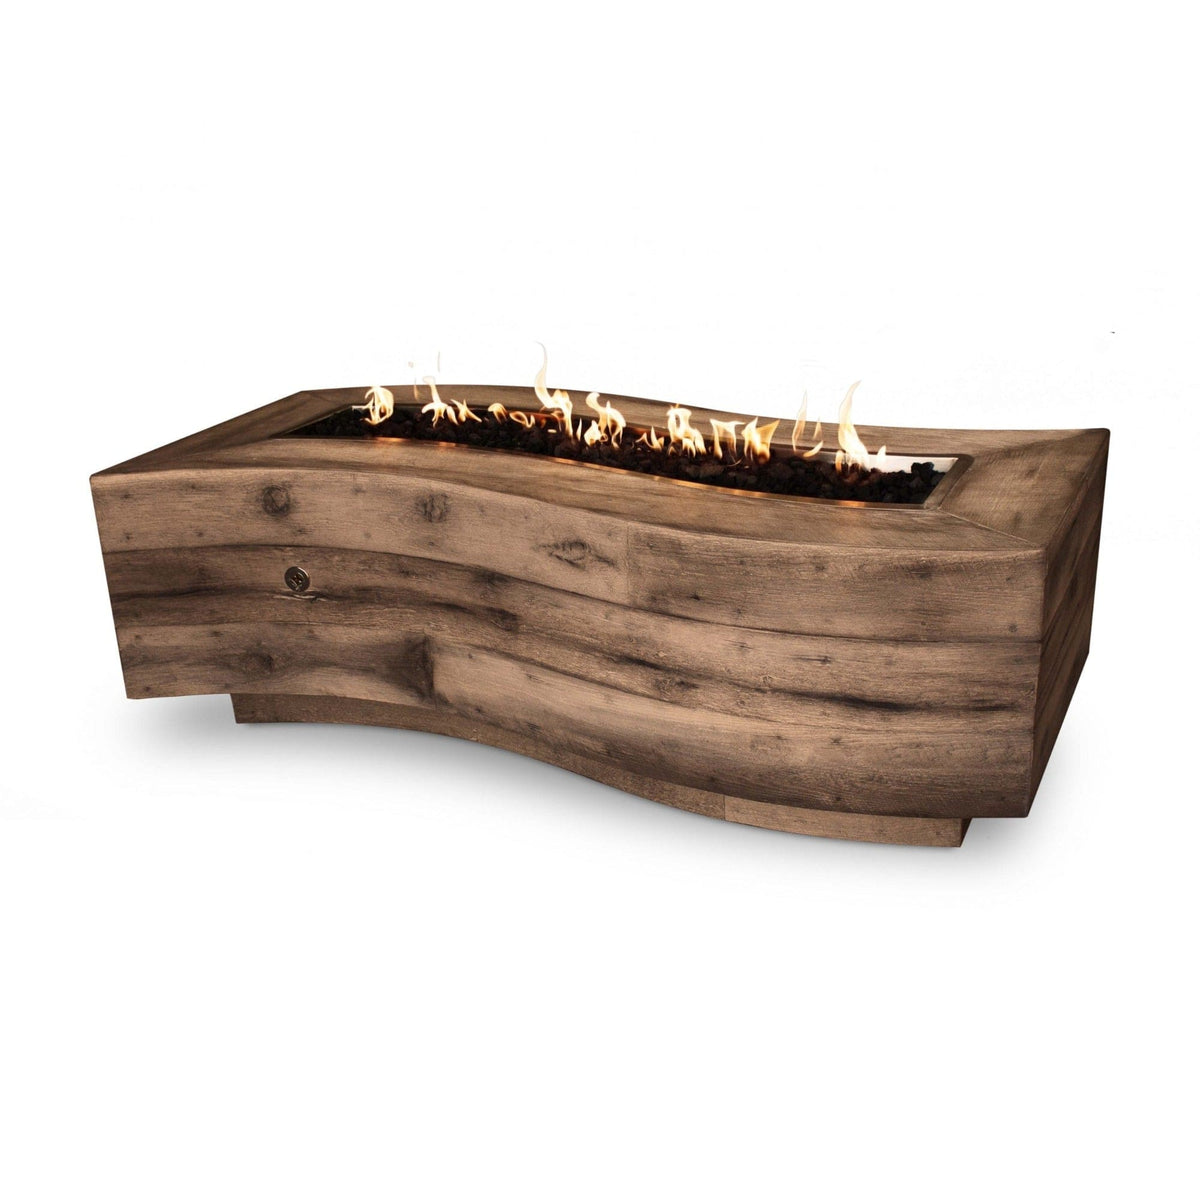 The Outdoor Plus Fire Features The Outdoor Plus BIG SUR FIRE PIT